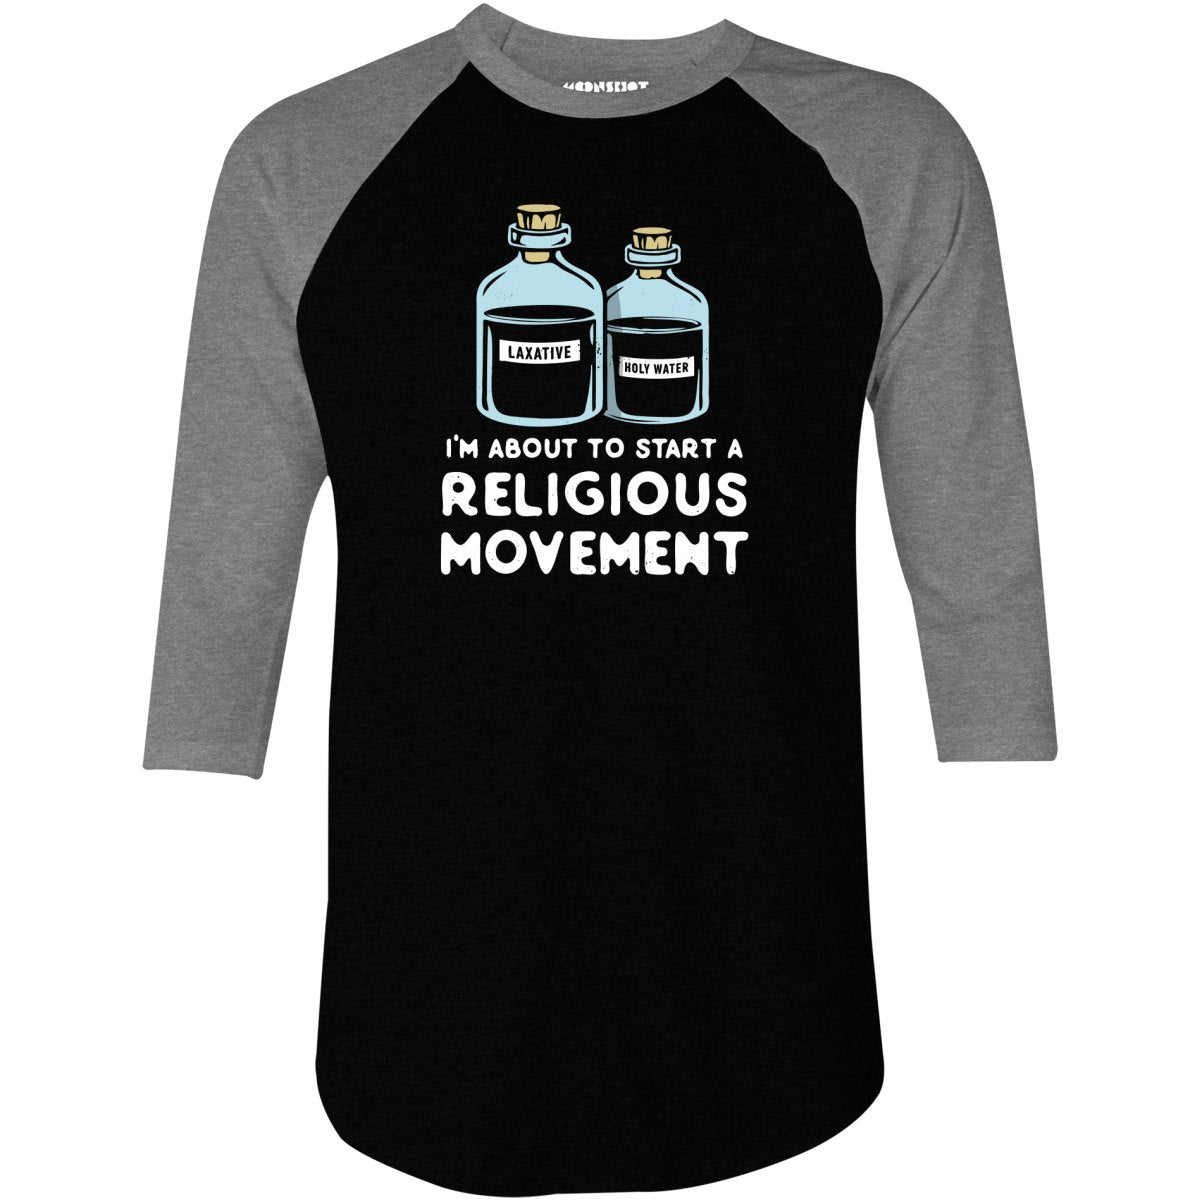 I'm About to Start a Religious Movement - 3/4 Sleeve Raglan T-Shirt